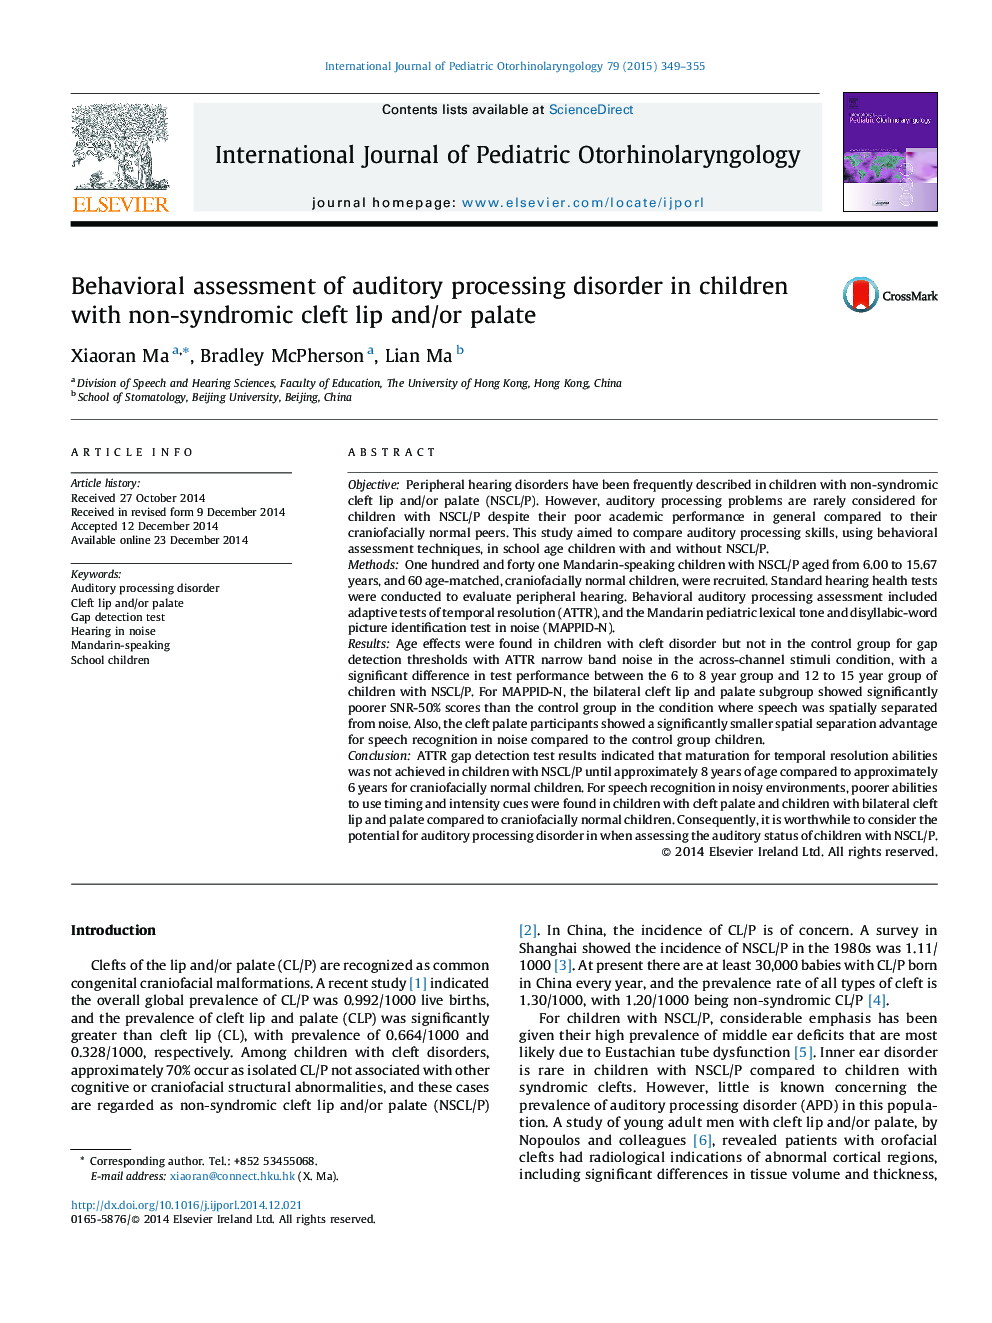 Behavioral assessment of auditory processing disorder in children with non-syndromic cleft lip and/or palate